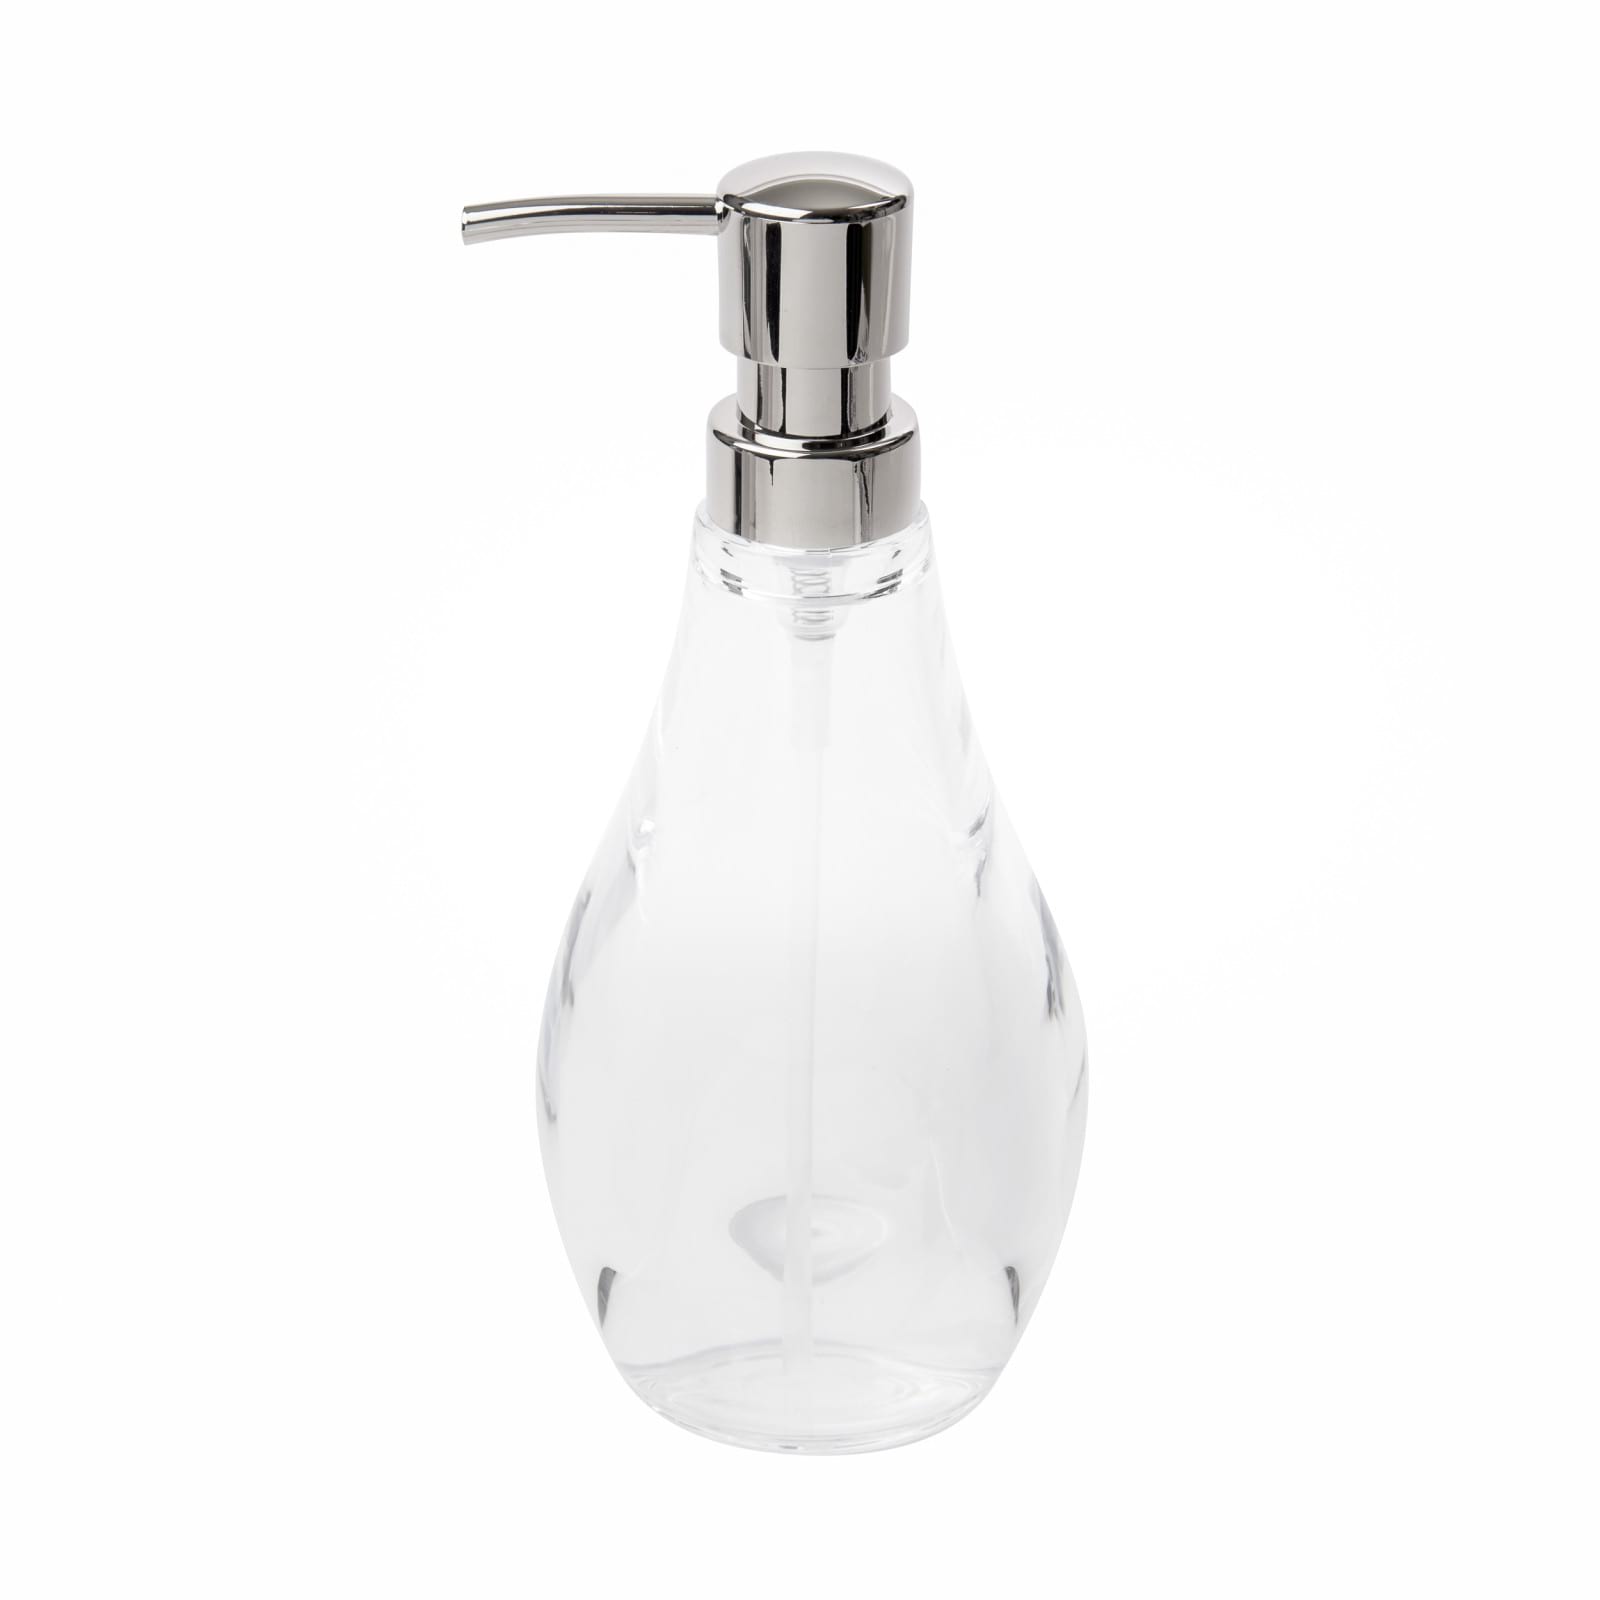 Umbra Droplet Soap Pump Clear | Design Is This